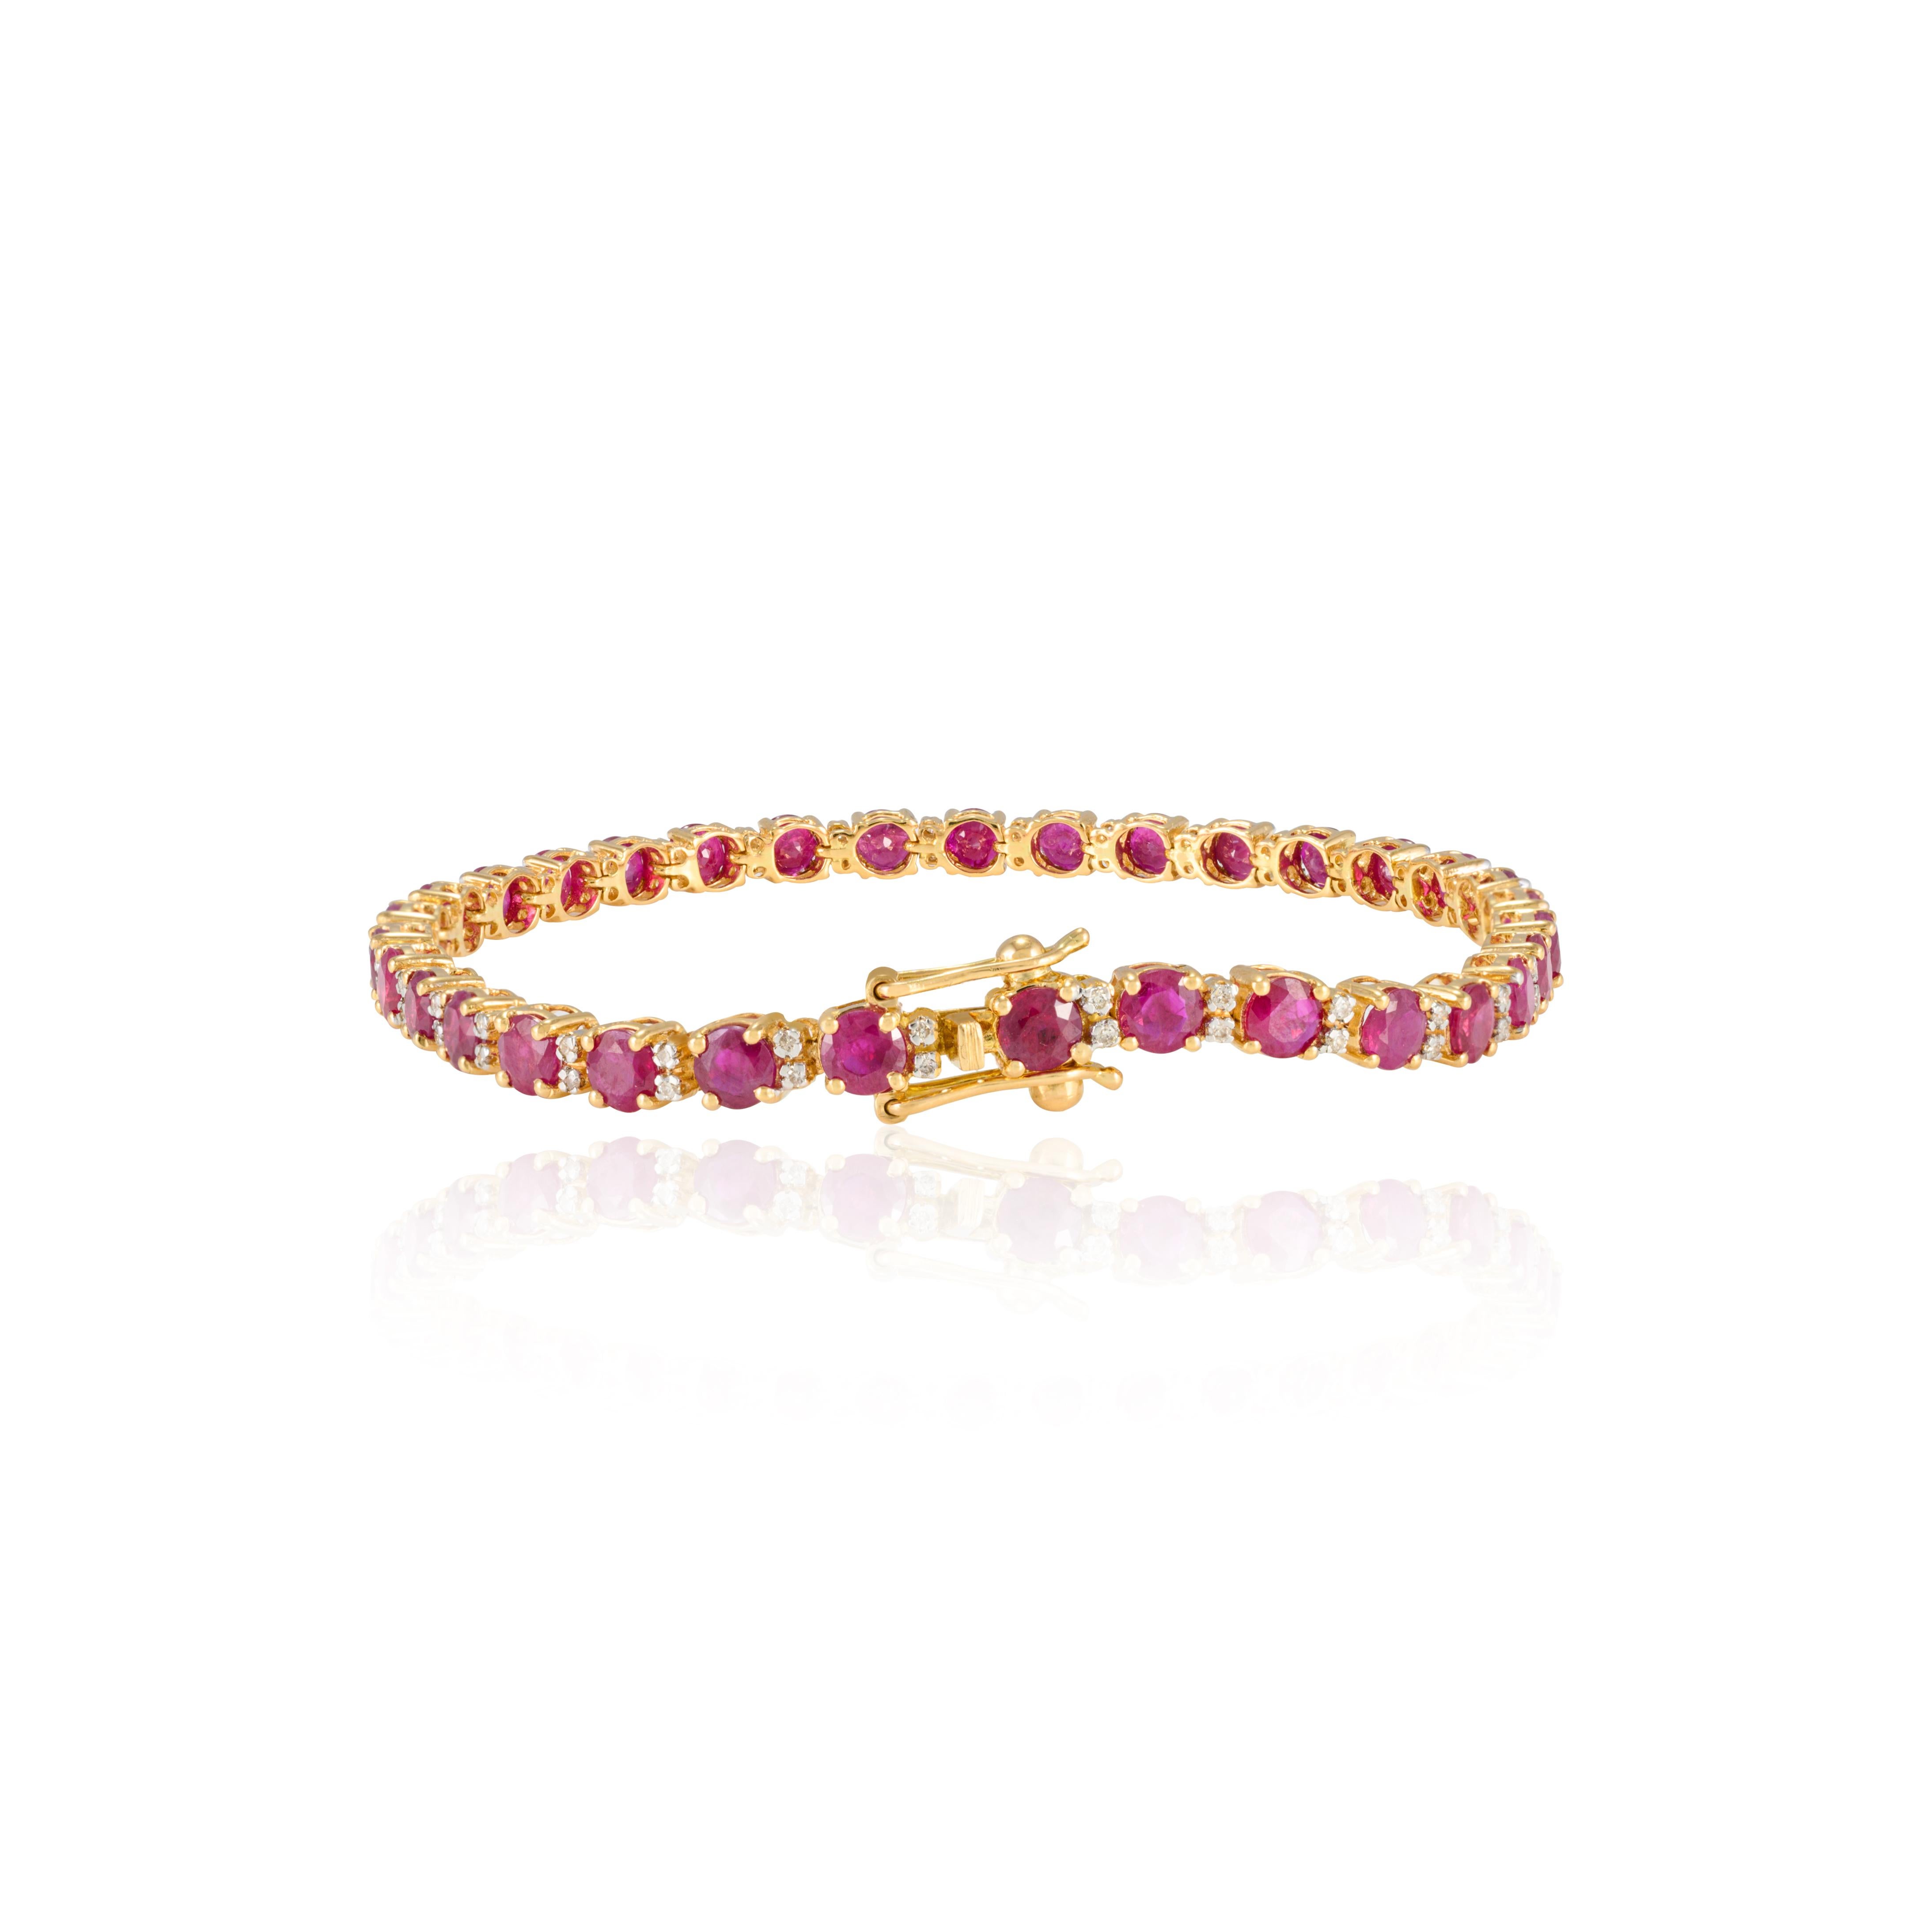 This Natural Ruby and Diamond Tennis Bracelet in 18K gold showcases 9.27 carats endlessly sparkling natural ruby and 0.34 carats of diamonds. It measures 7 inches long in length. 
Ruby improves mental strength. 
Designed with perfect round cut ruby